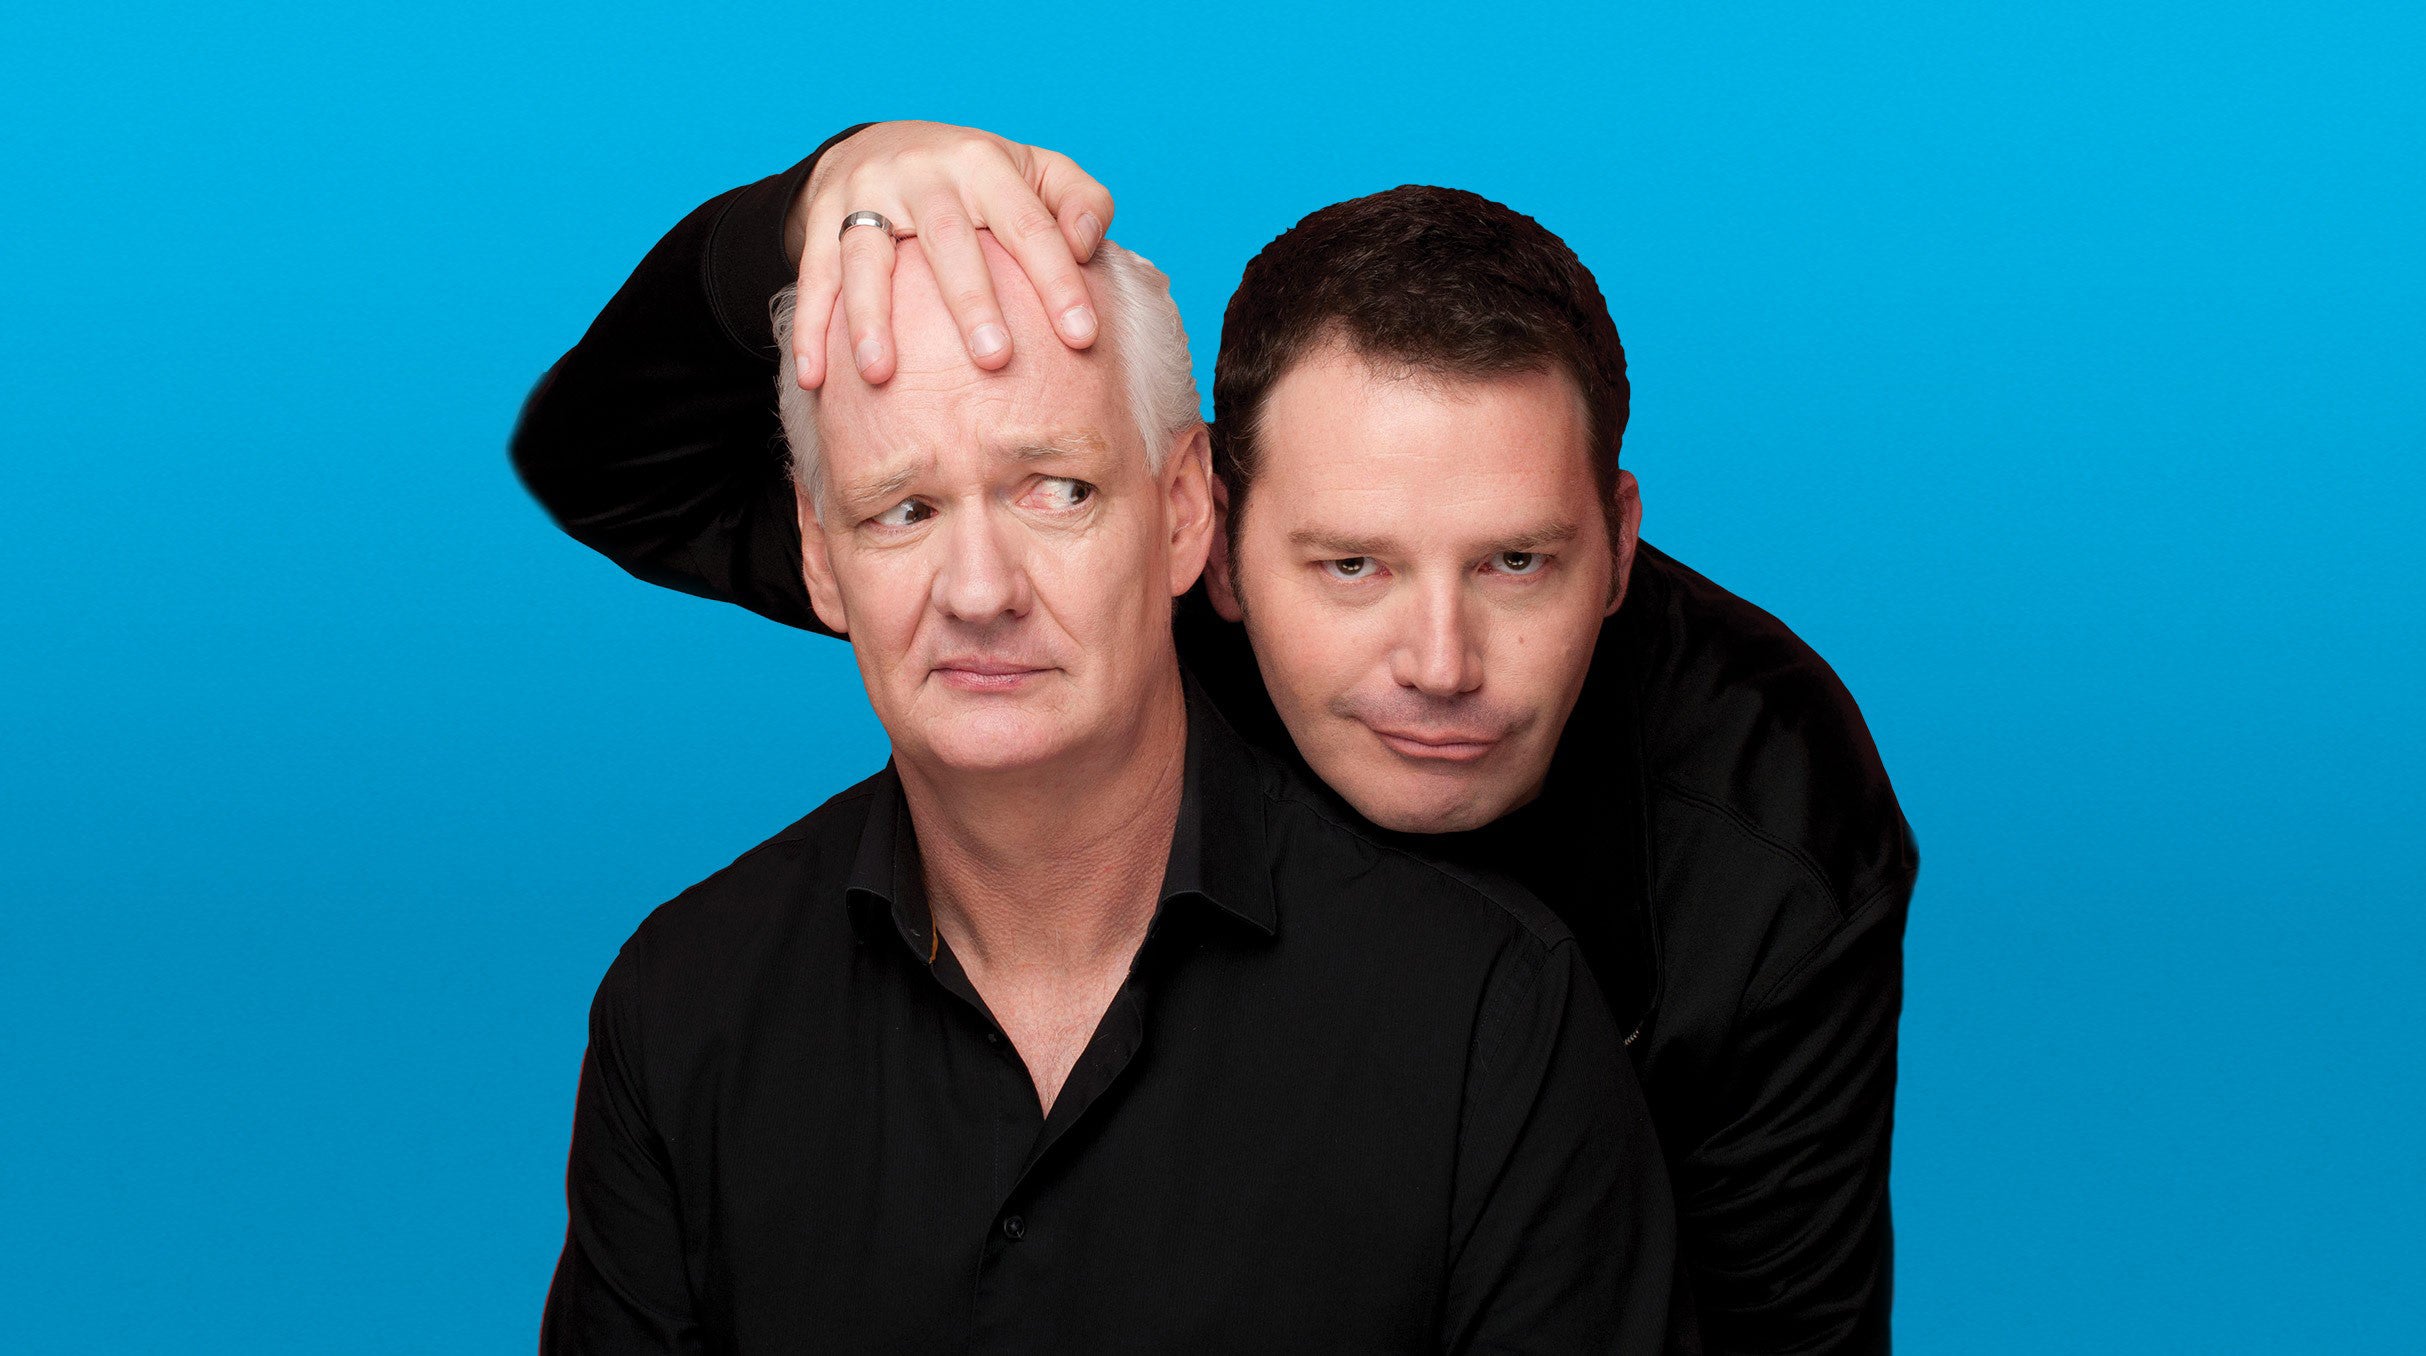 Colin Mochrie & Brad Sherwood: Asking for Trouble presale code for your tickets in Utica